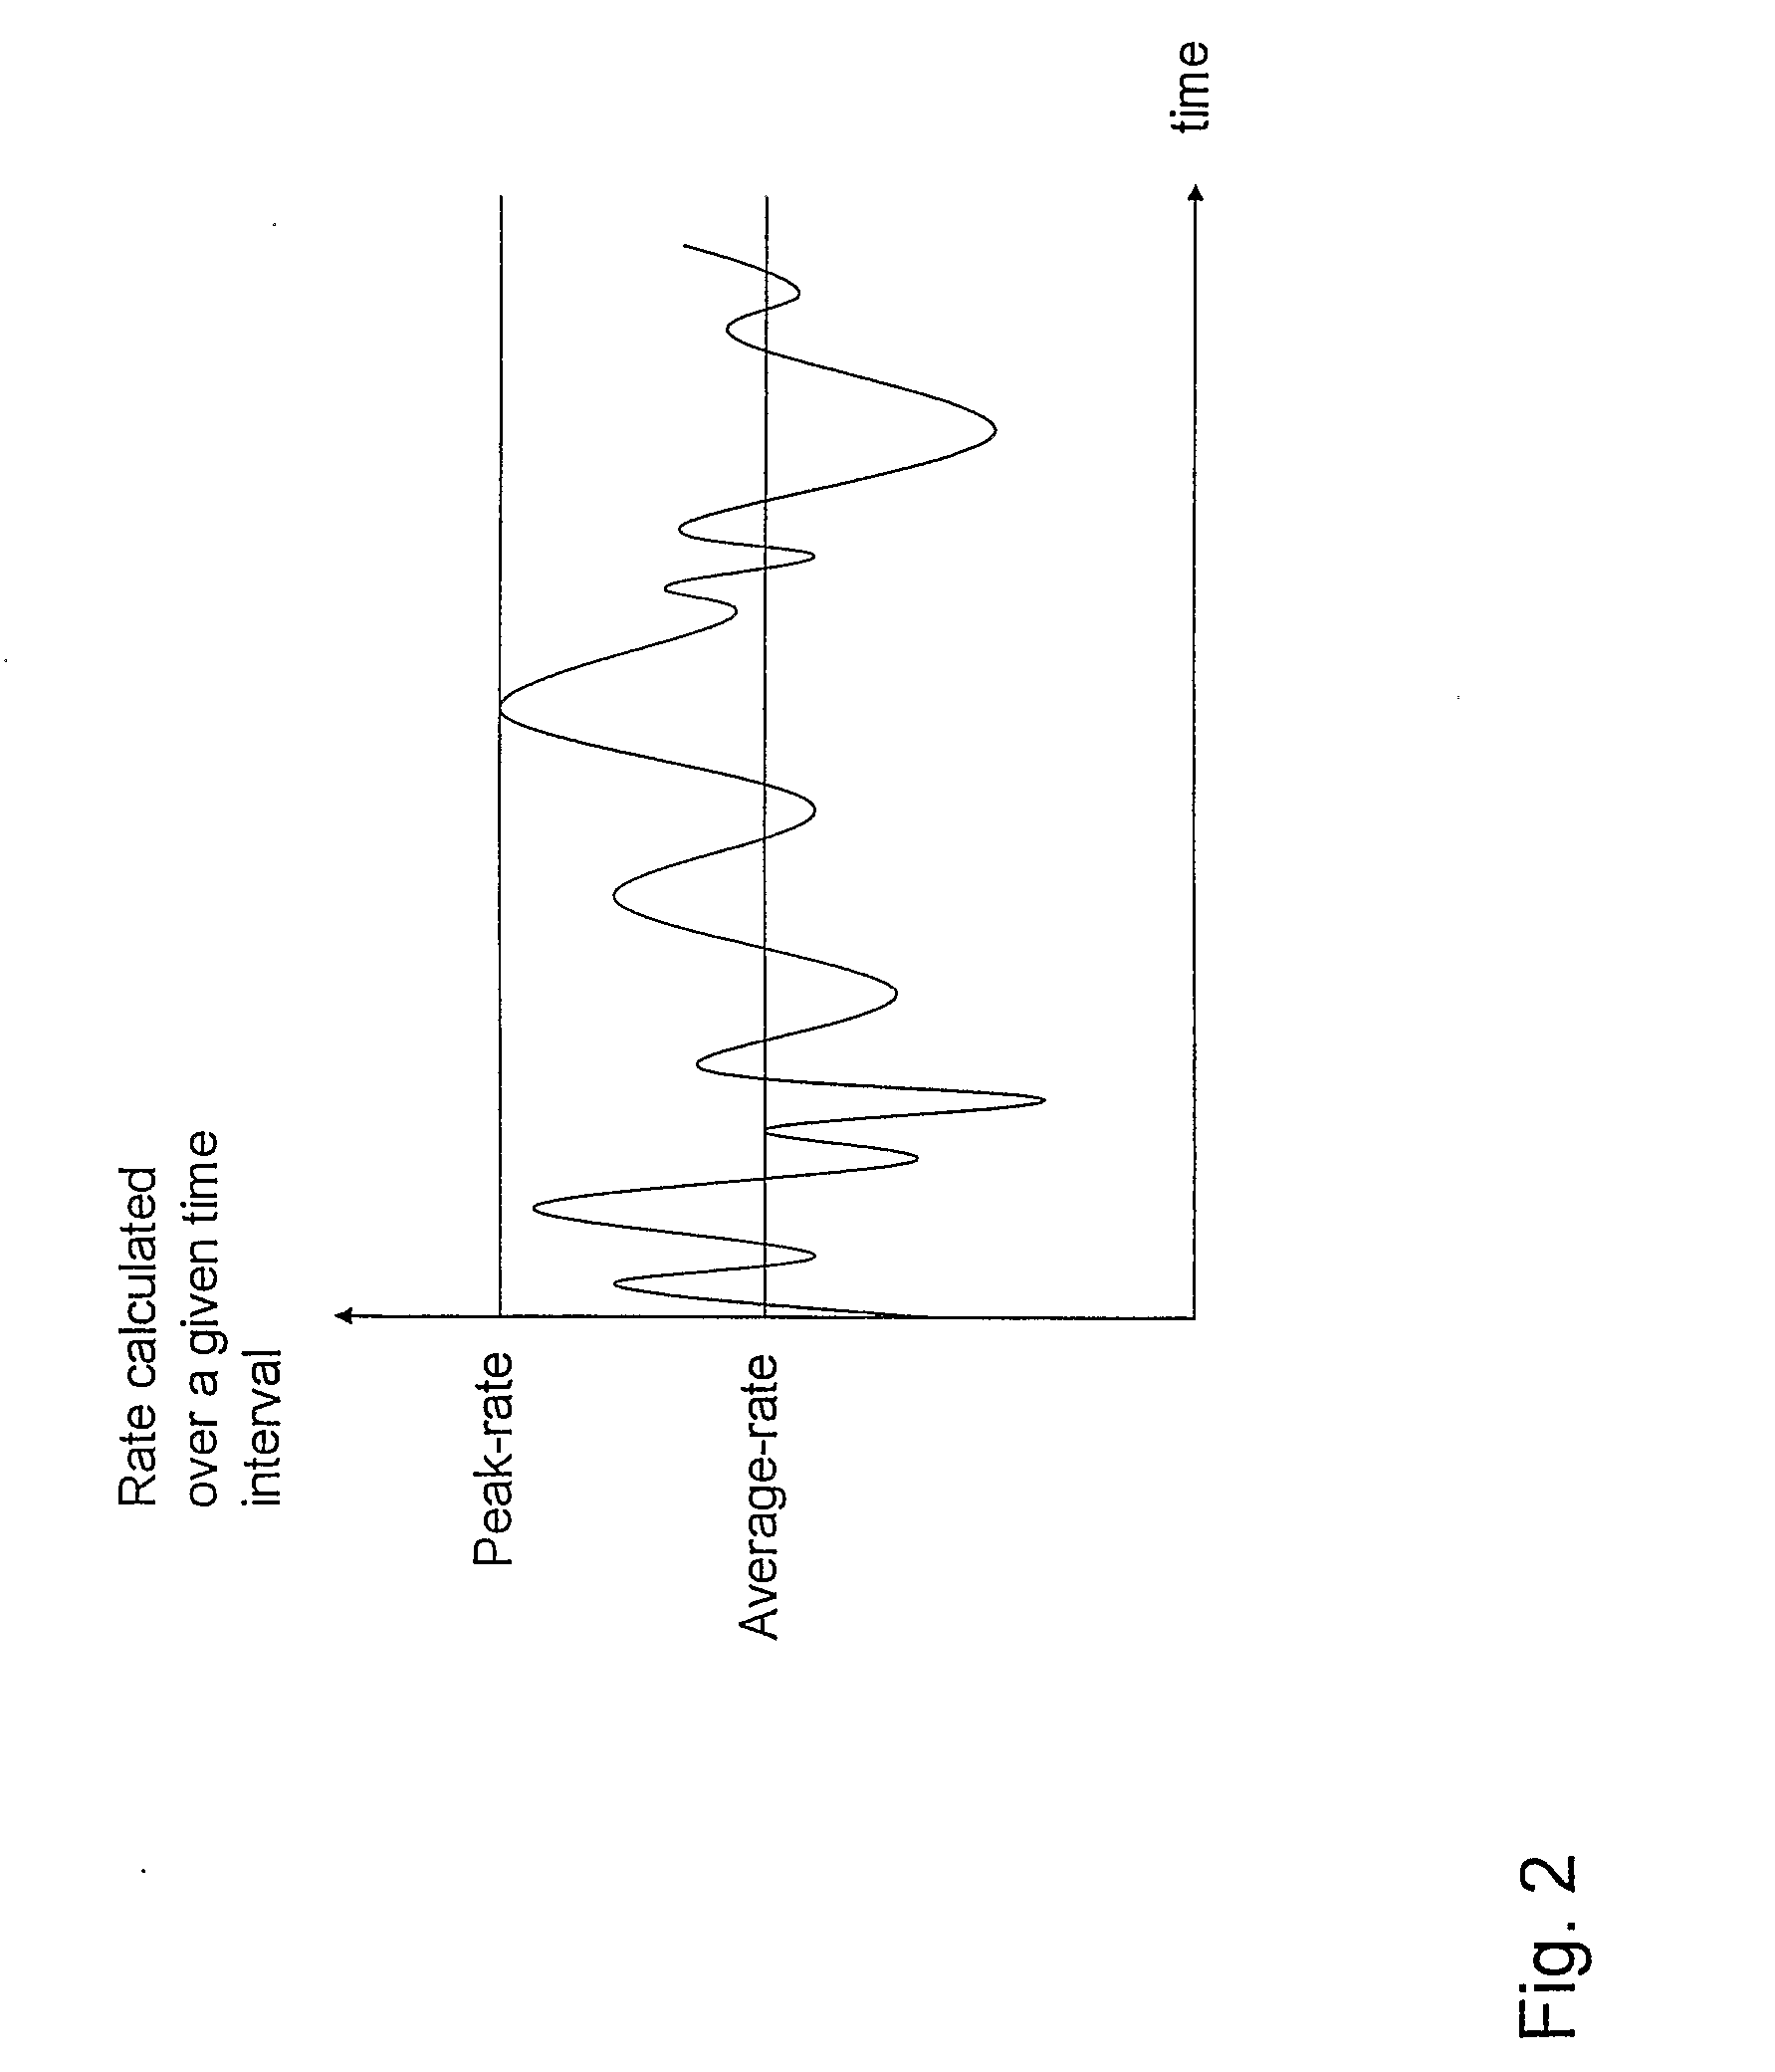 Method for controlling the forwarding quality in a data network